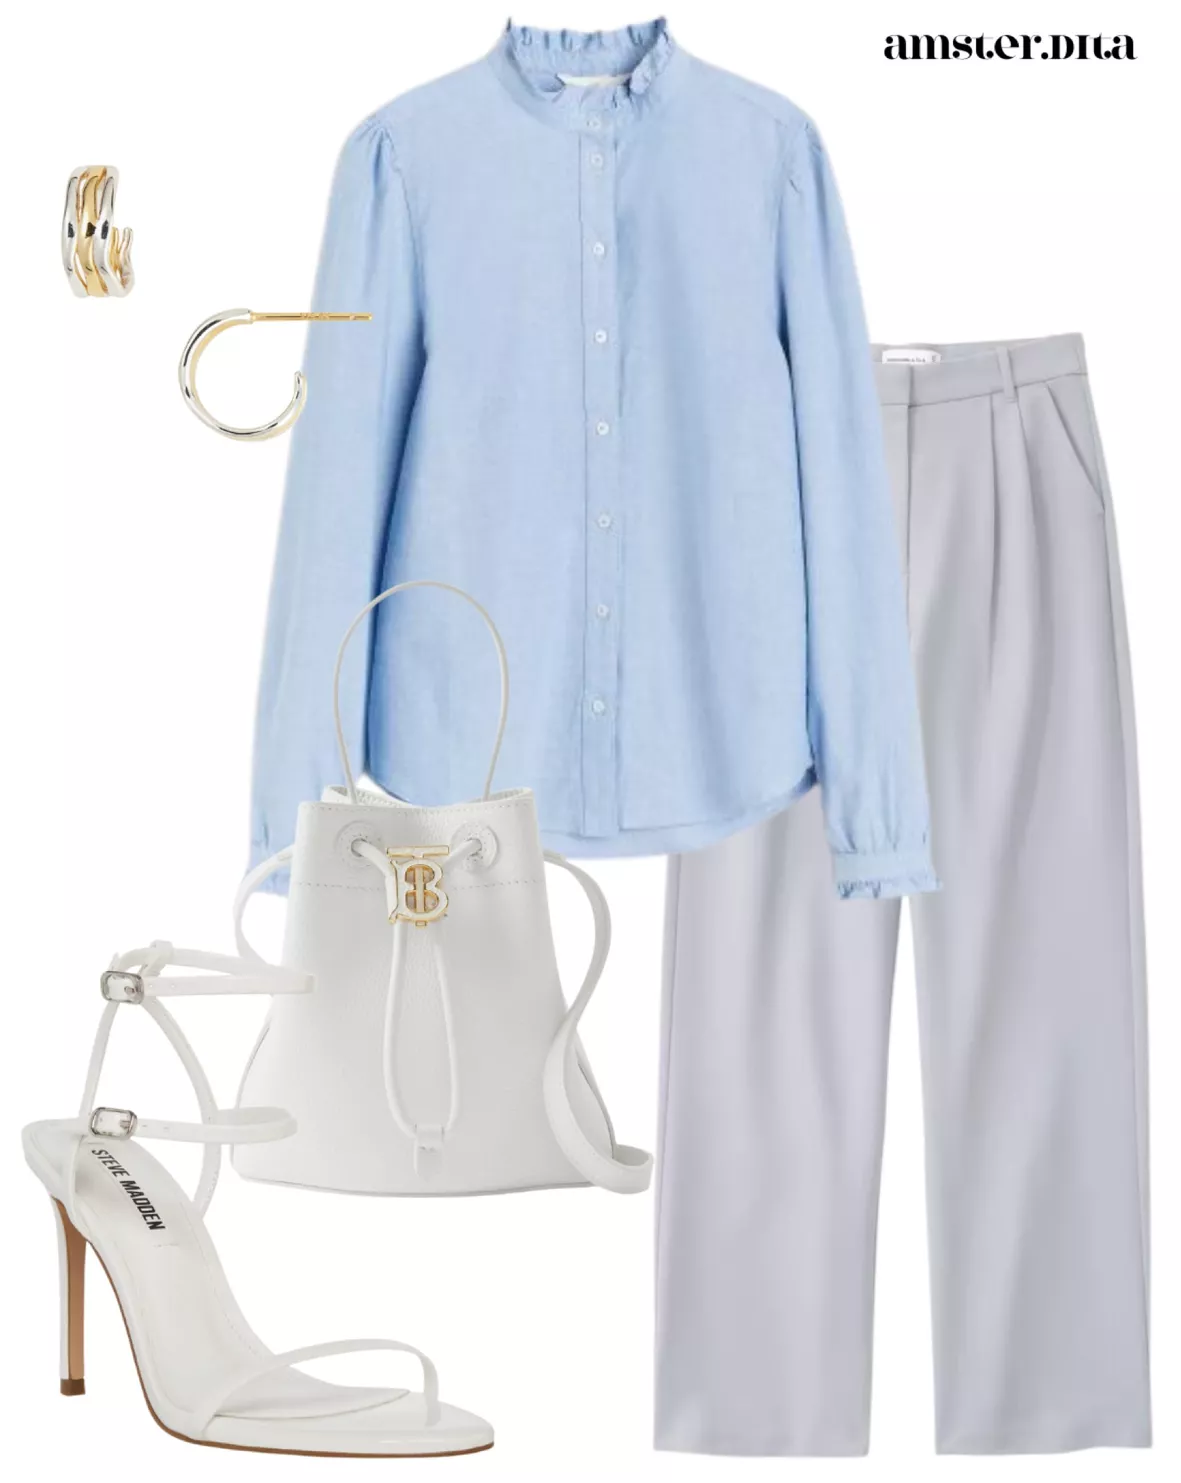 Work Outfit Idea: Bright Trousers, a White Blouse, and an Interesting Long  Necklace